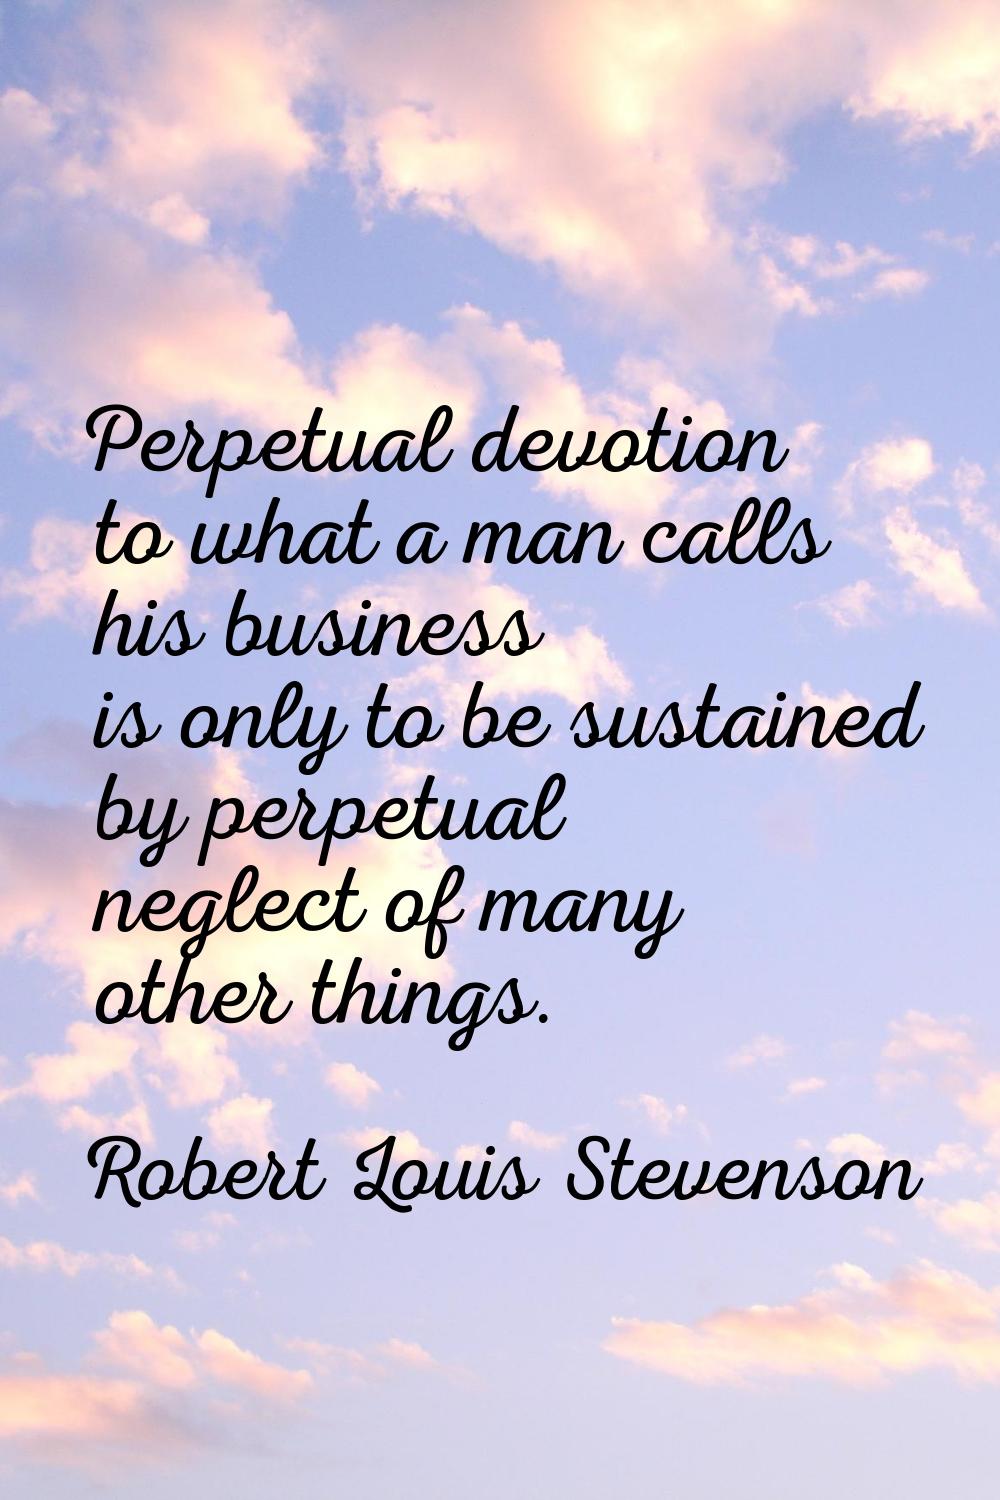 Perpetual devotion to what a man calls his business is only to be sustained by perpetual neglect of